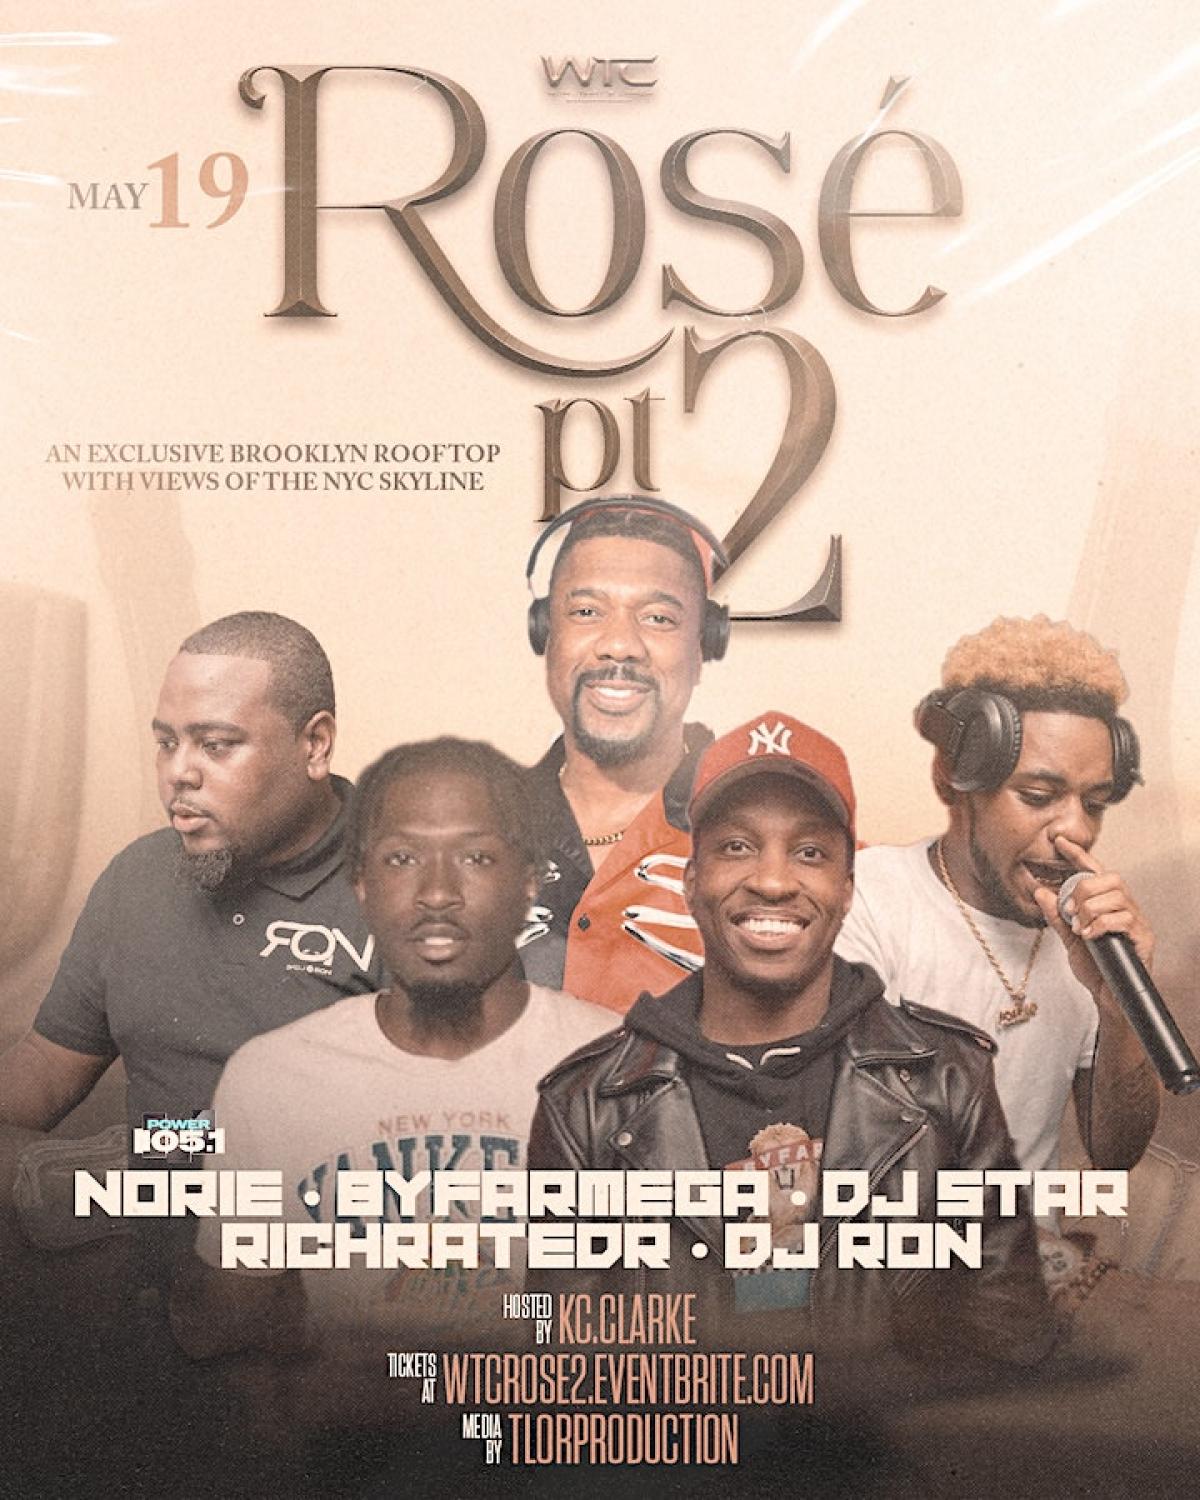 Rosé 2 flyer or graphic.